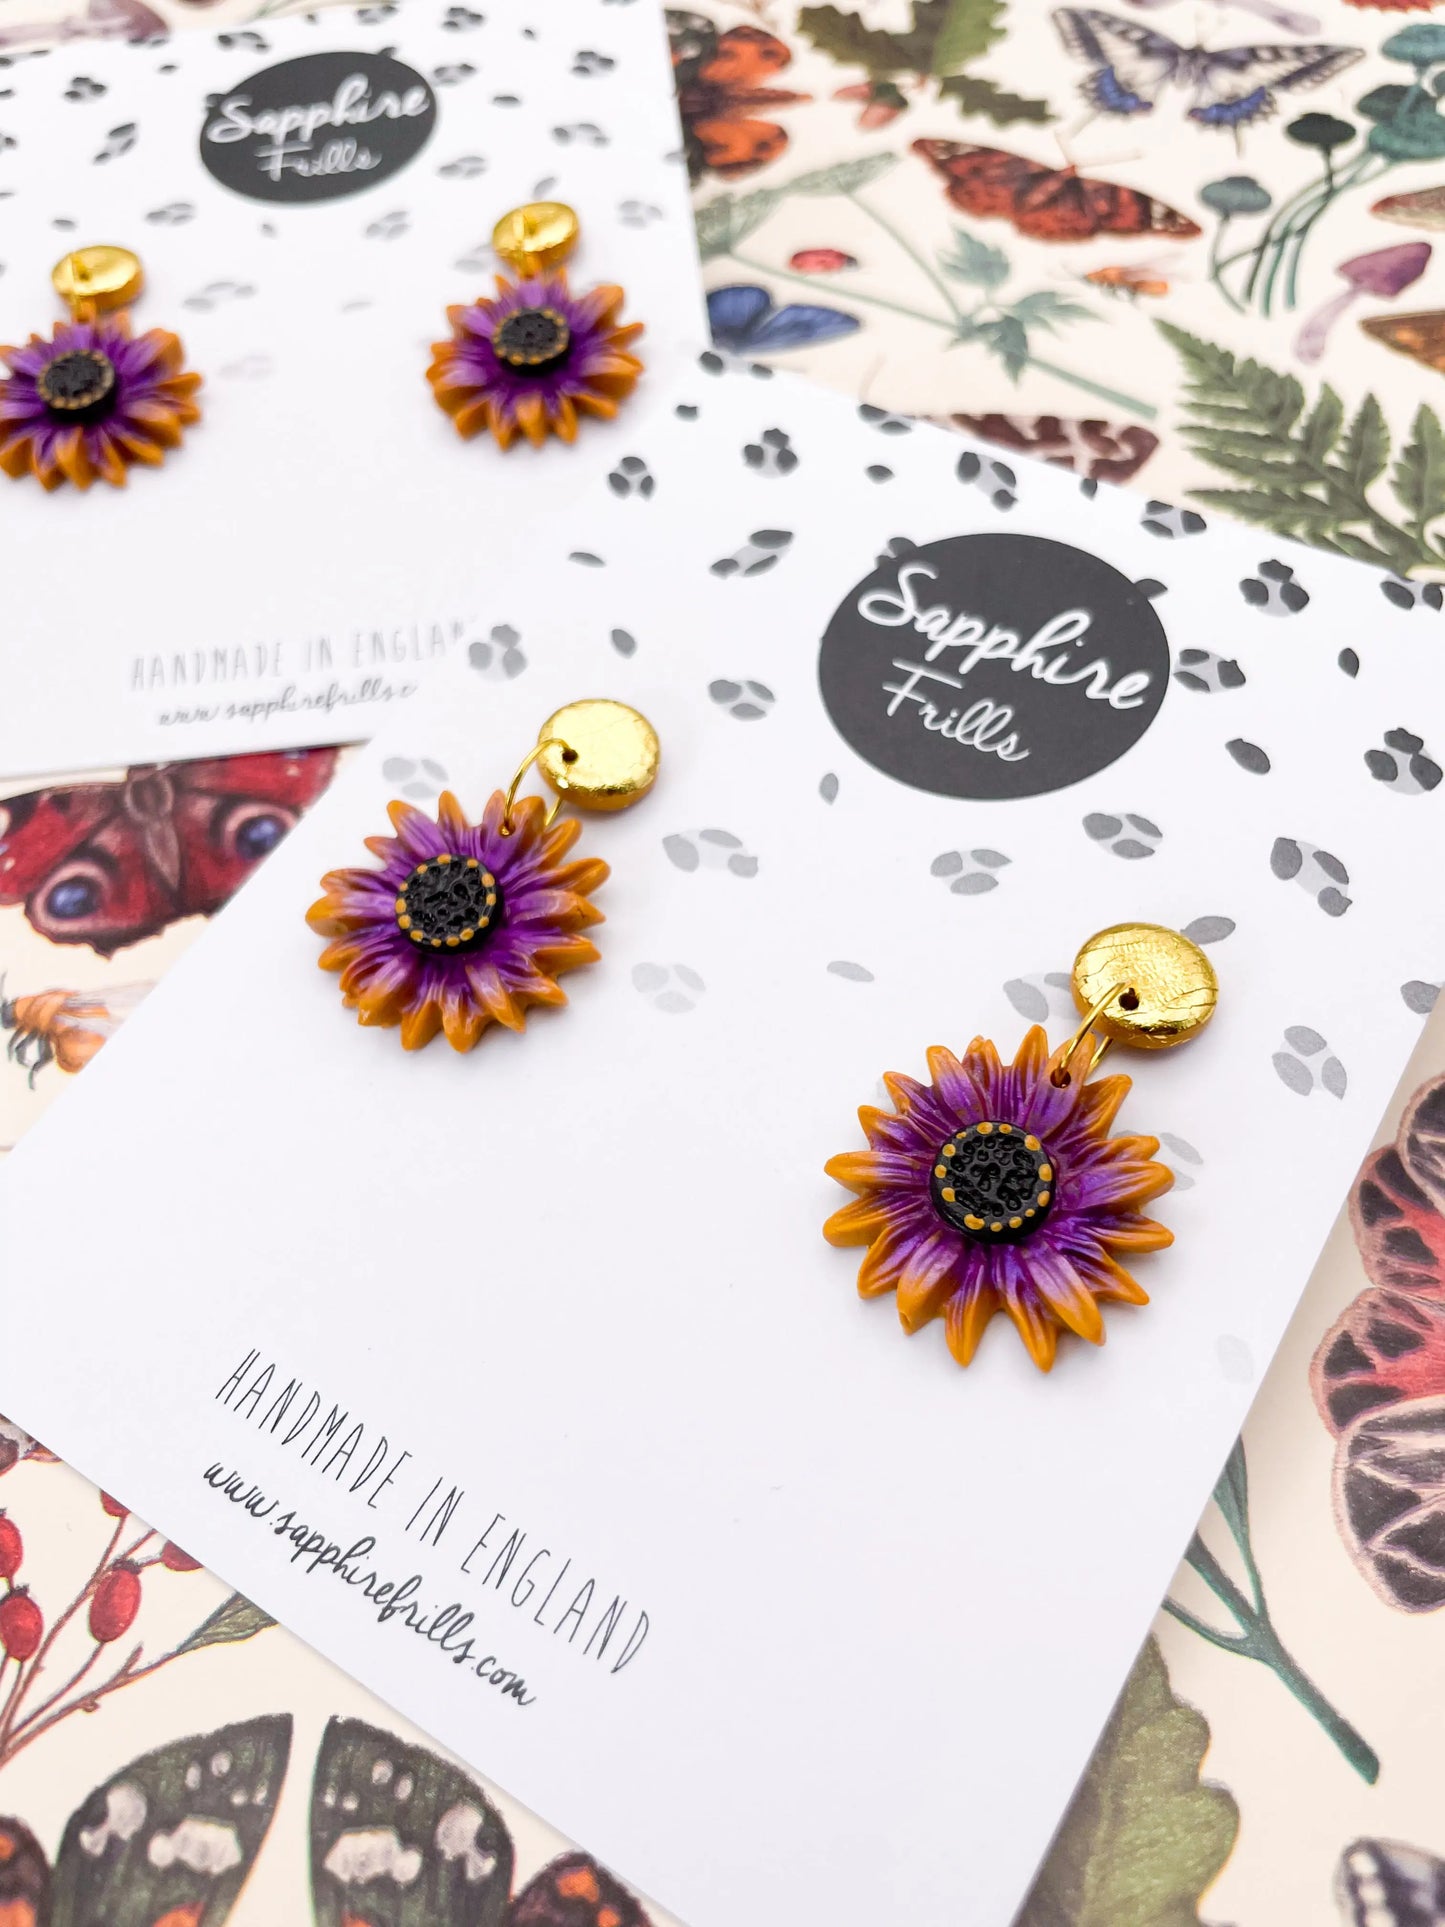 Mustard, Purple and Gold Foil African Daisy Dangle Earrings from Sapphire Frills